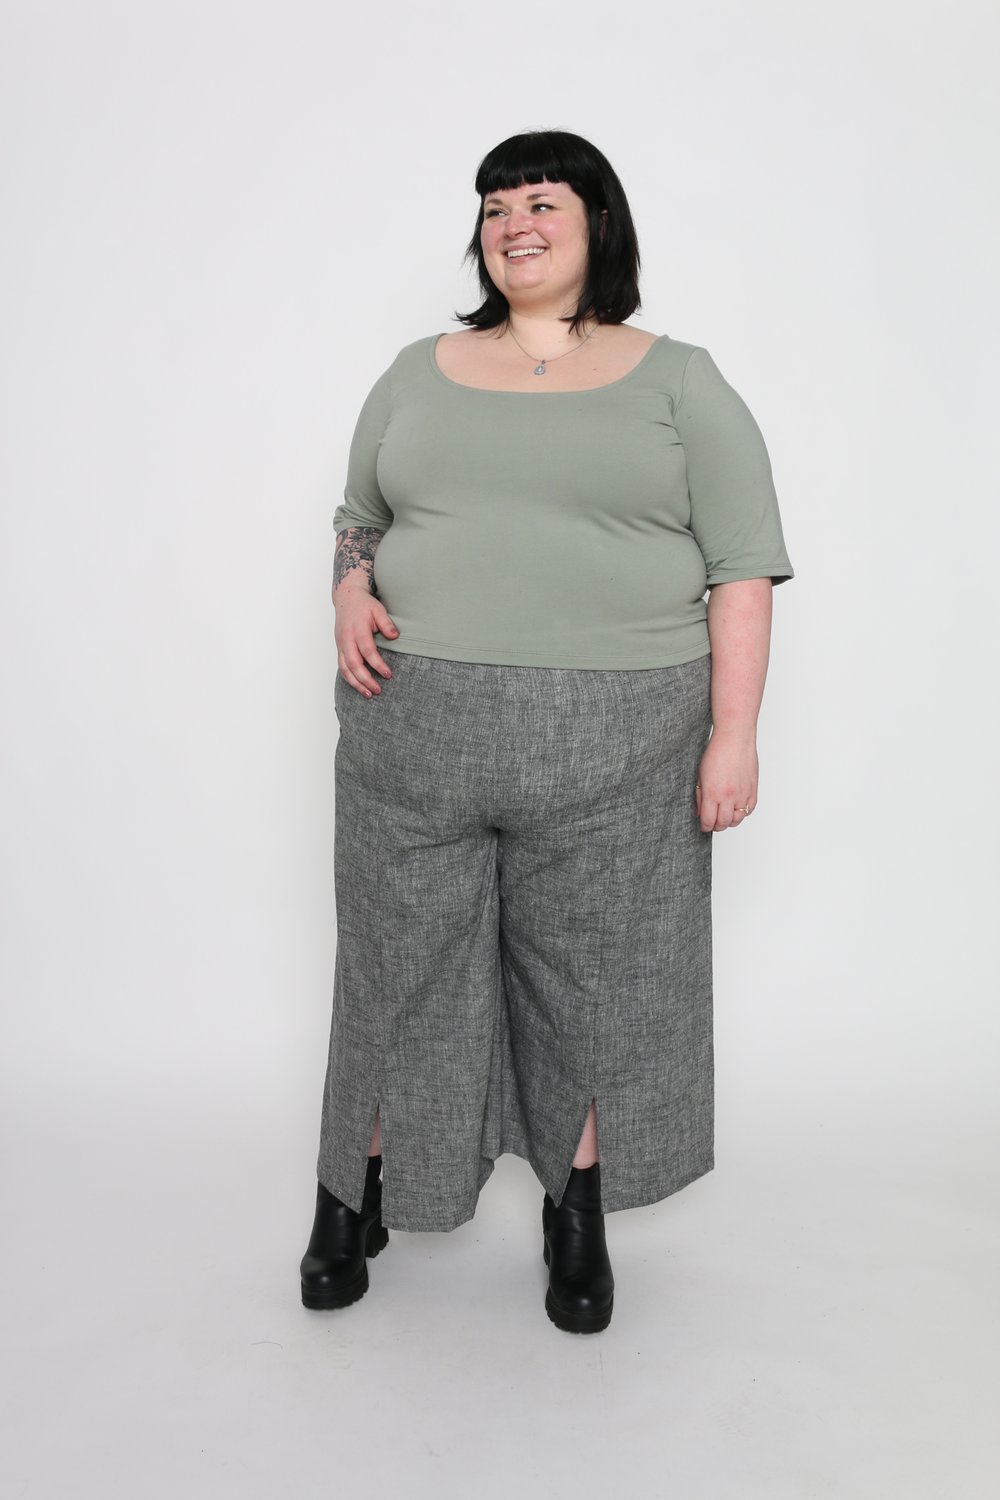 Jackie is wearing a size 4X and her measurements are: Height 5&#39;8&quot; | Bust 56&quot;| Waist 53&quot; | Hip 68.5&quot;